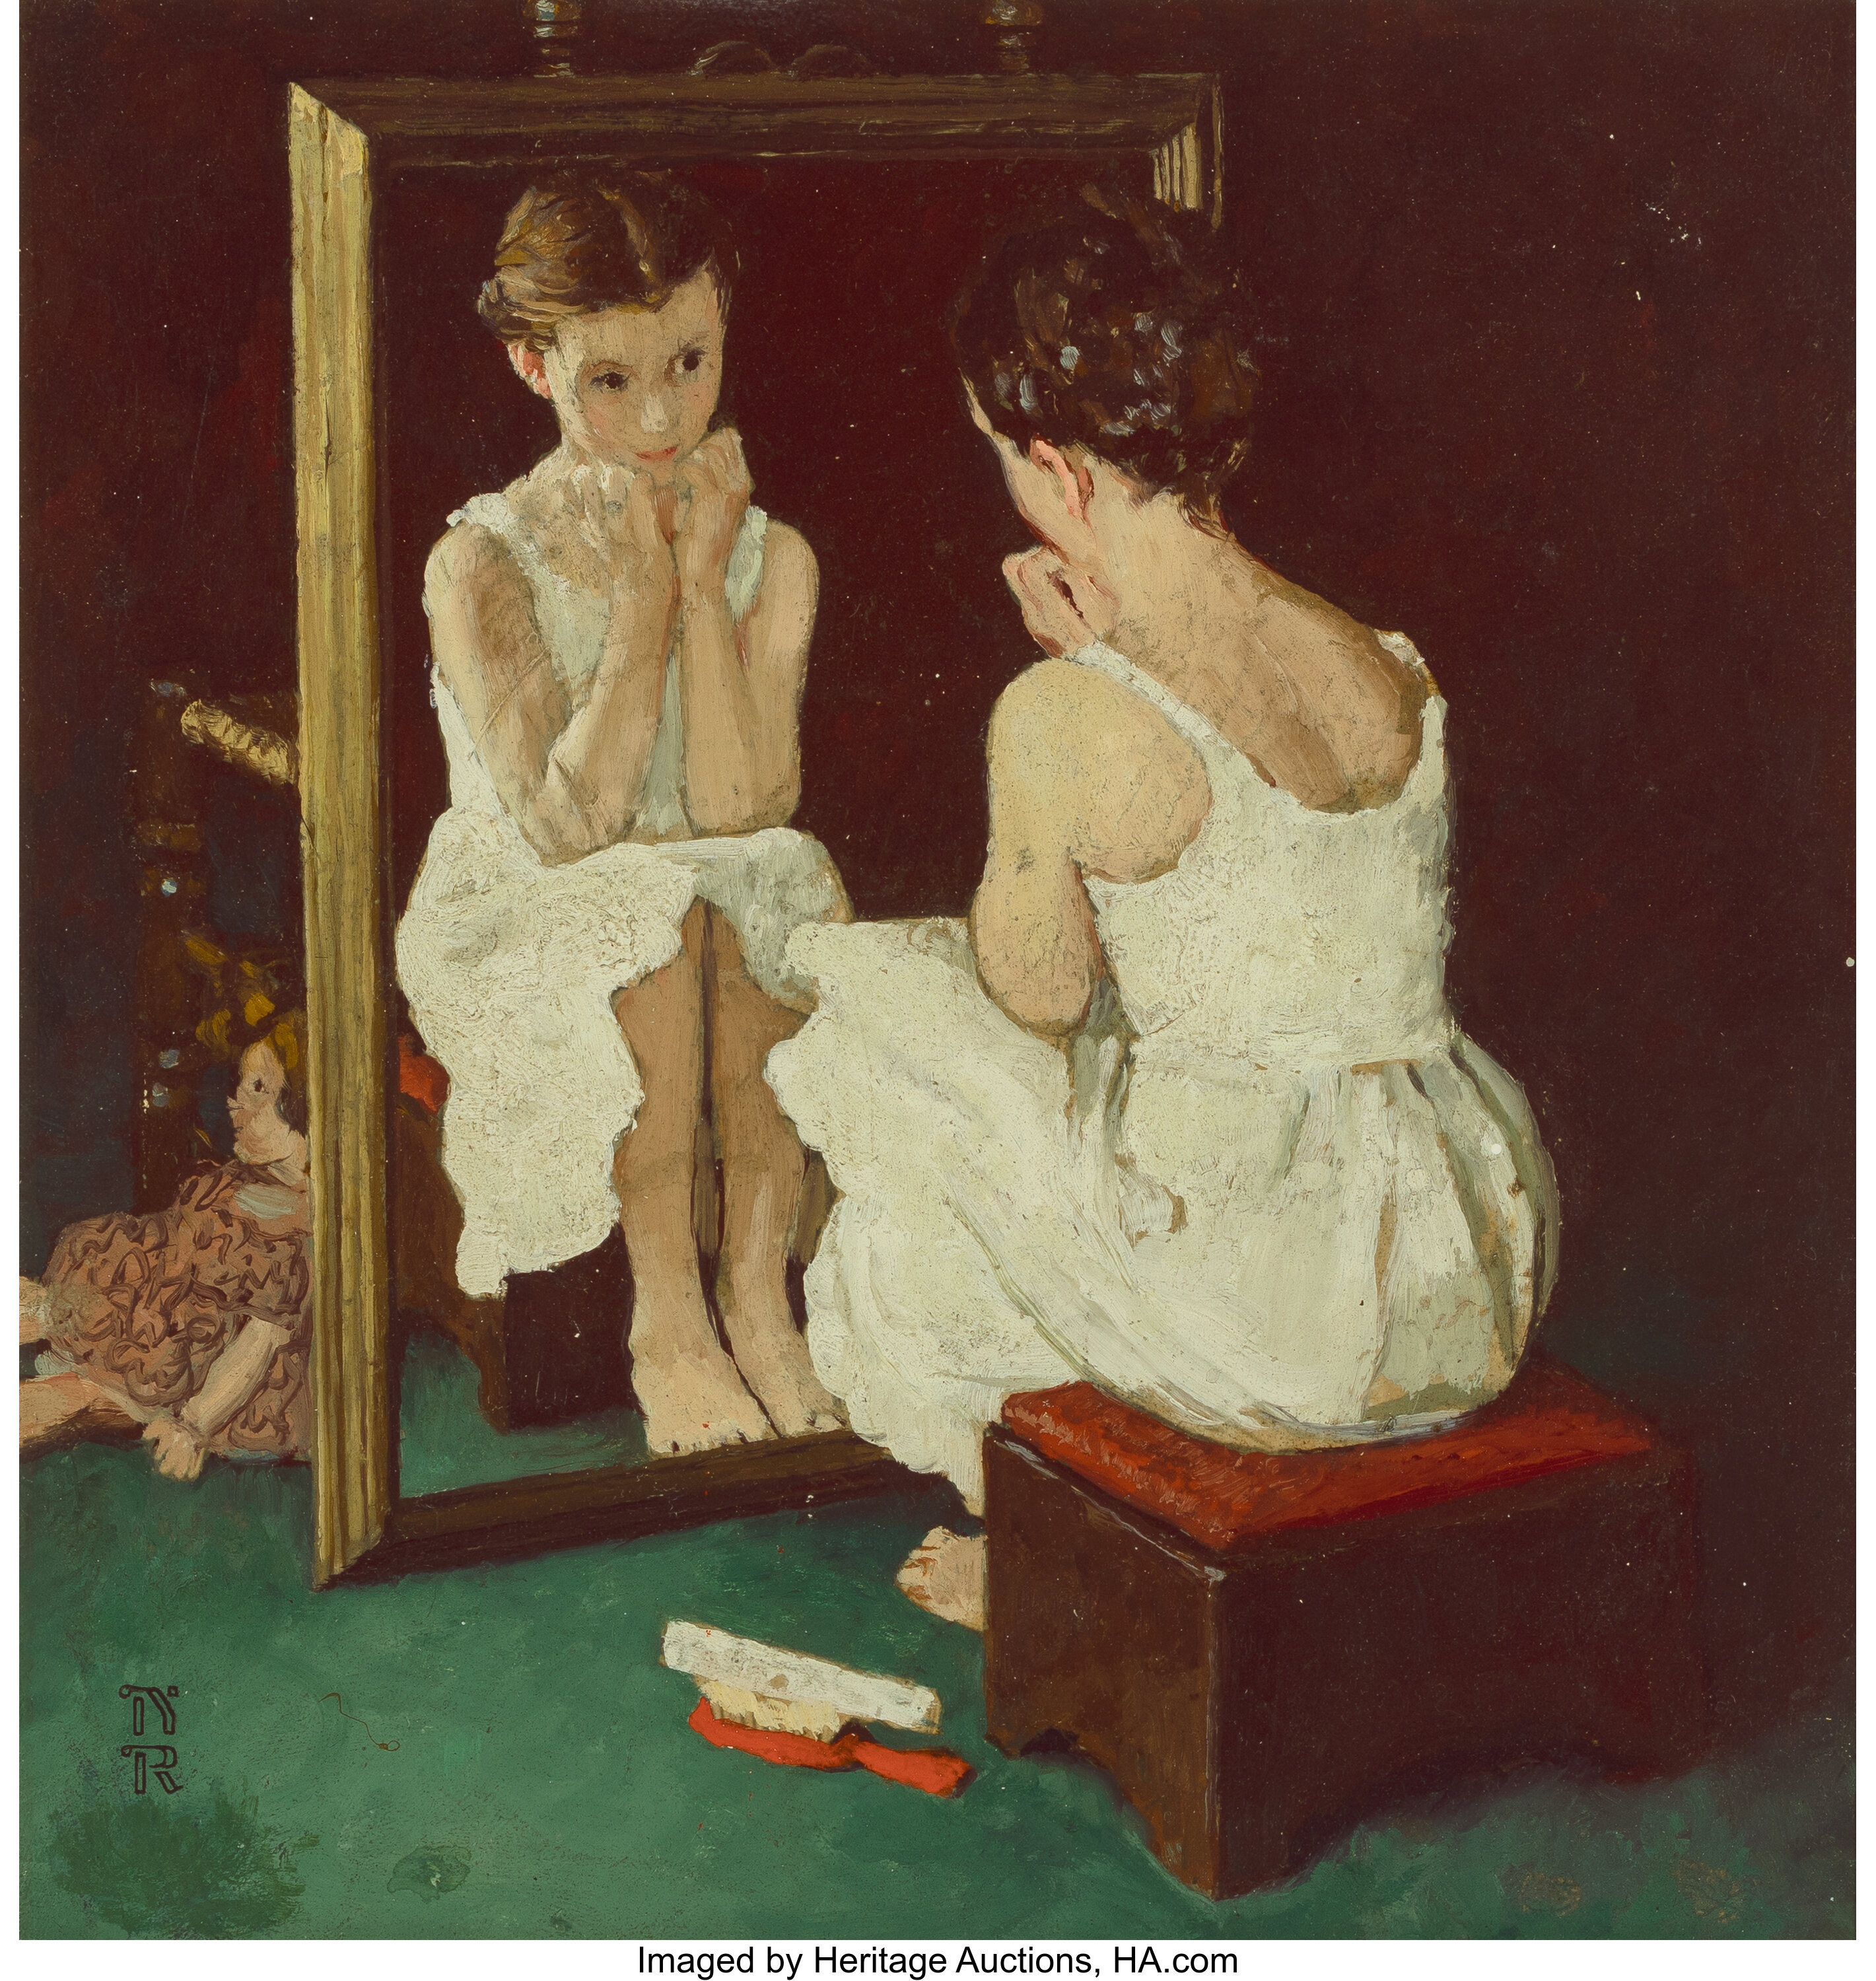 Norman Rockwell (American, 1894-1978). Girl at Mirror, The Saturday